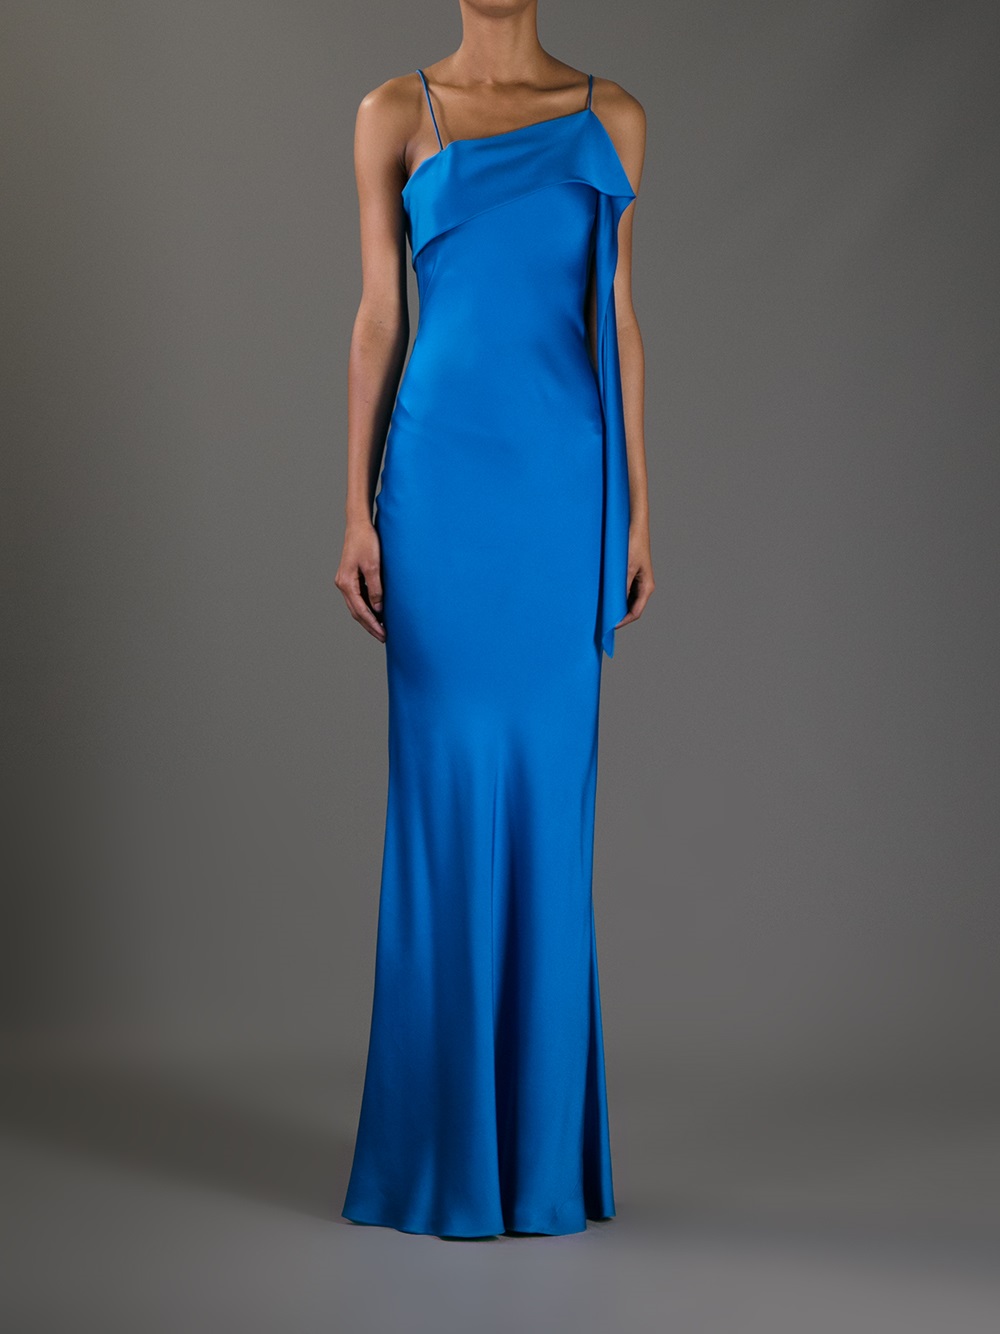 Lyst - John galliano Evening Gown in Blue